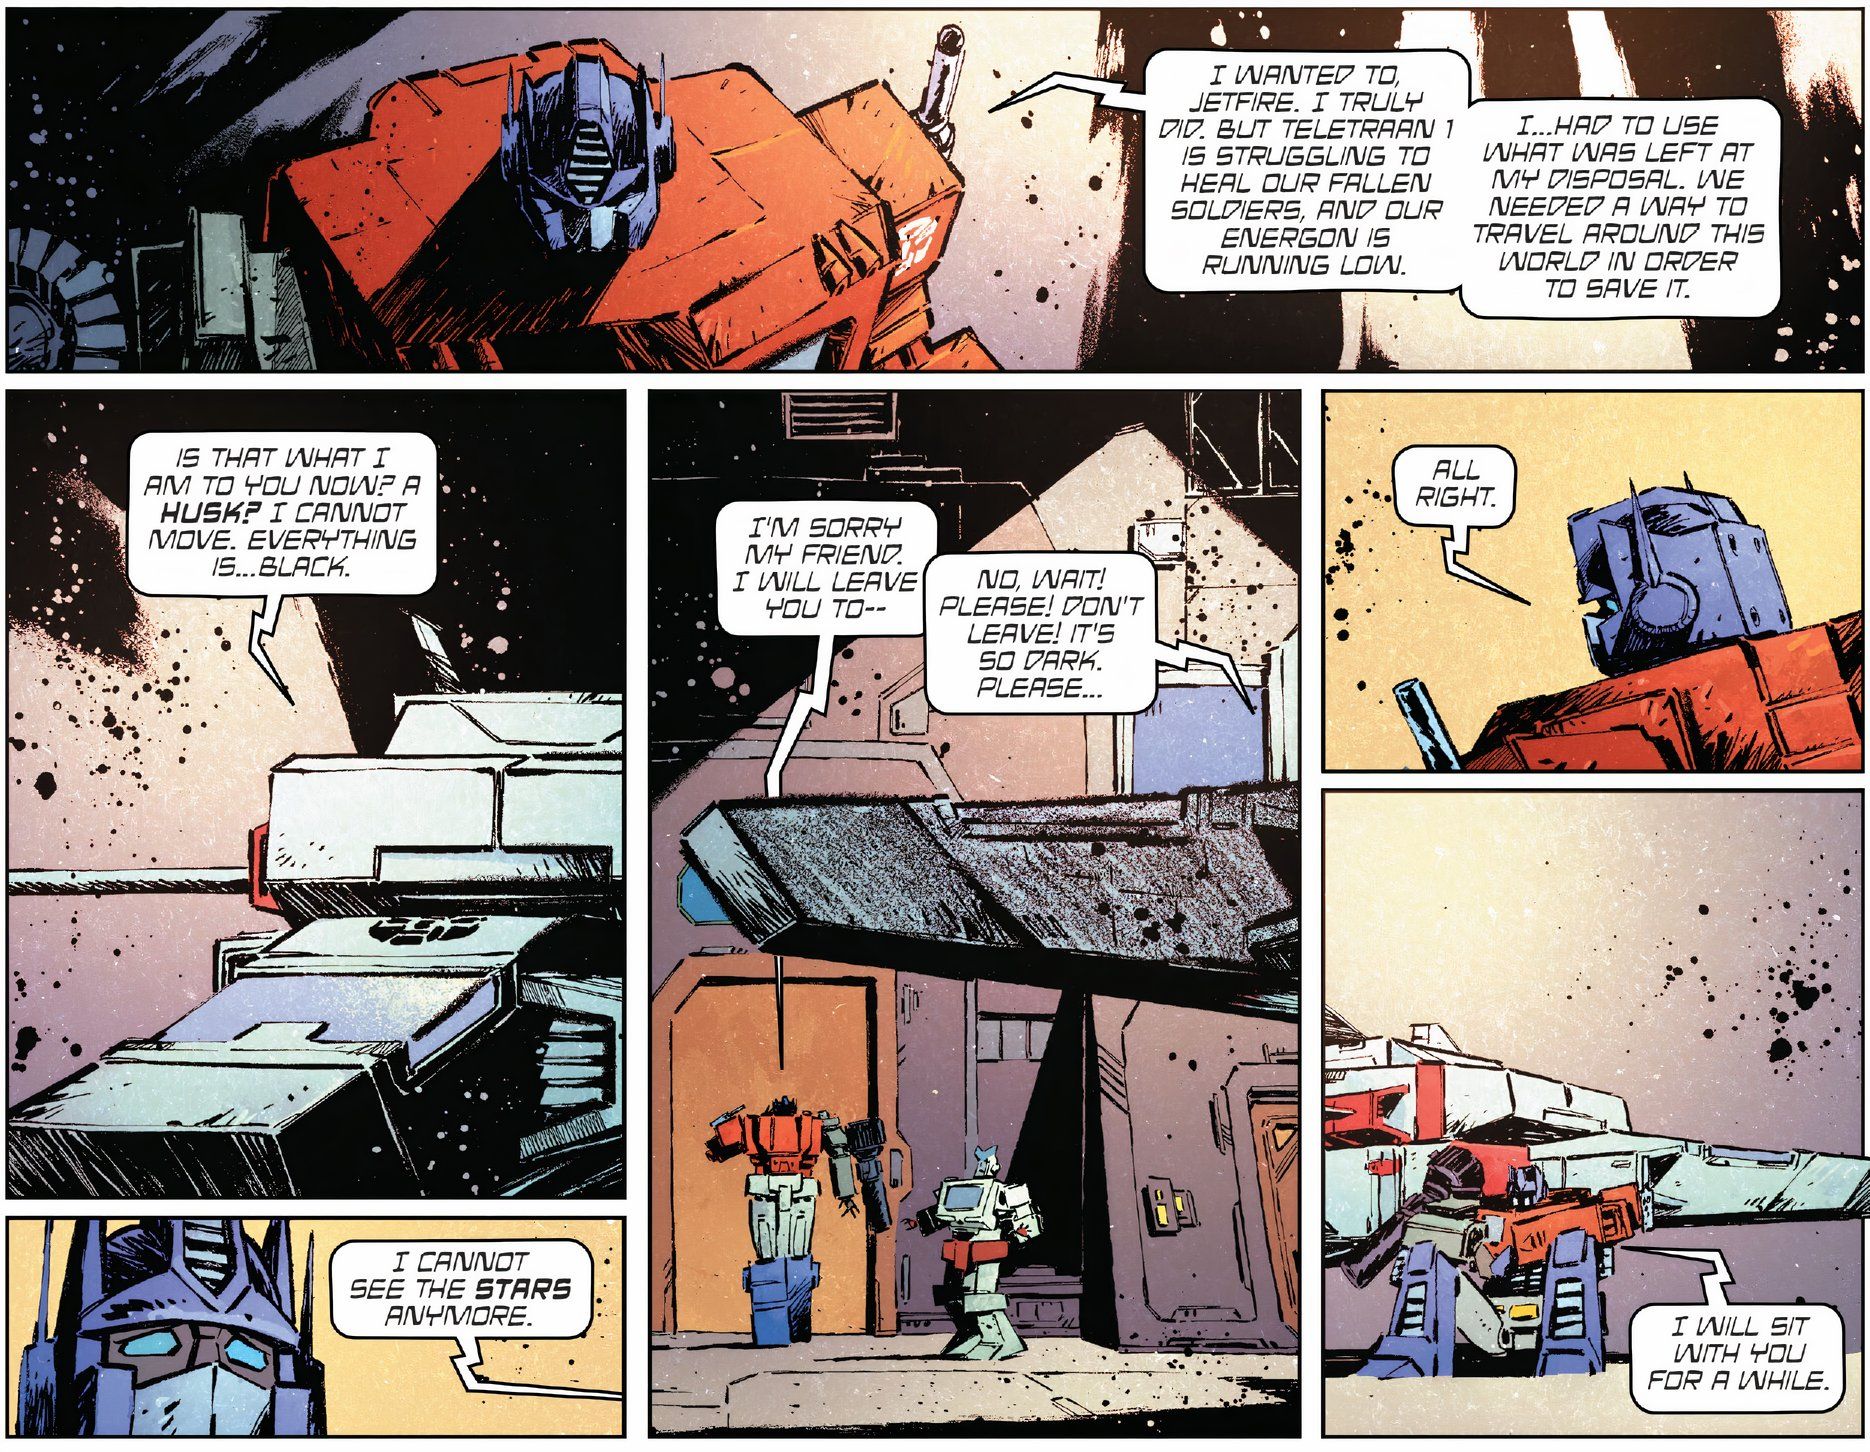 Transformers #8 Jetfire can't see the stars anymore